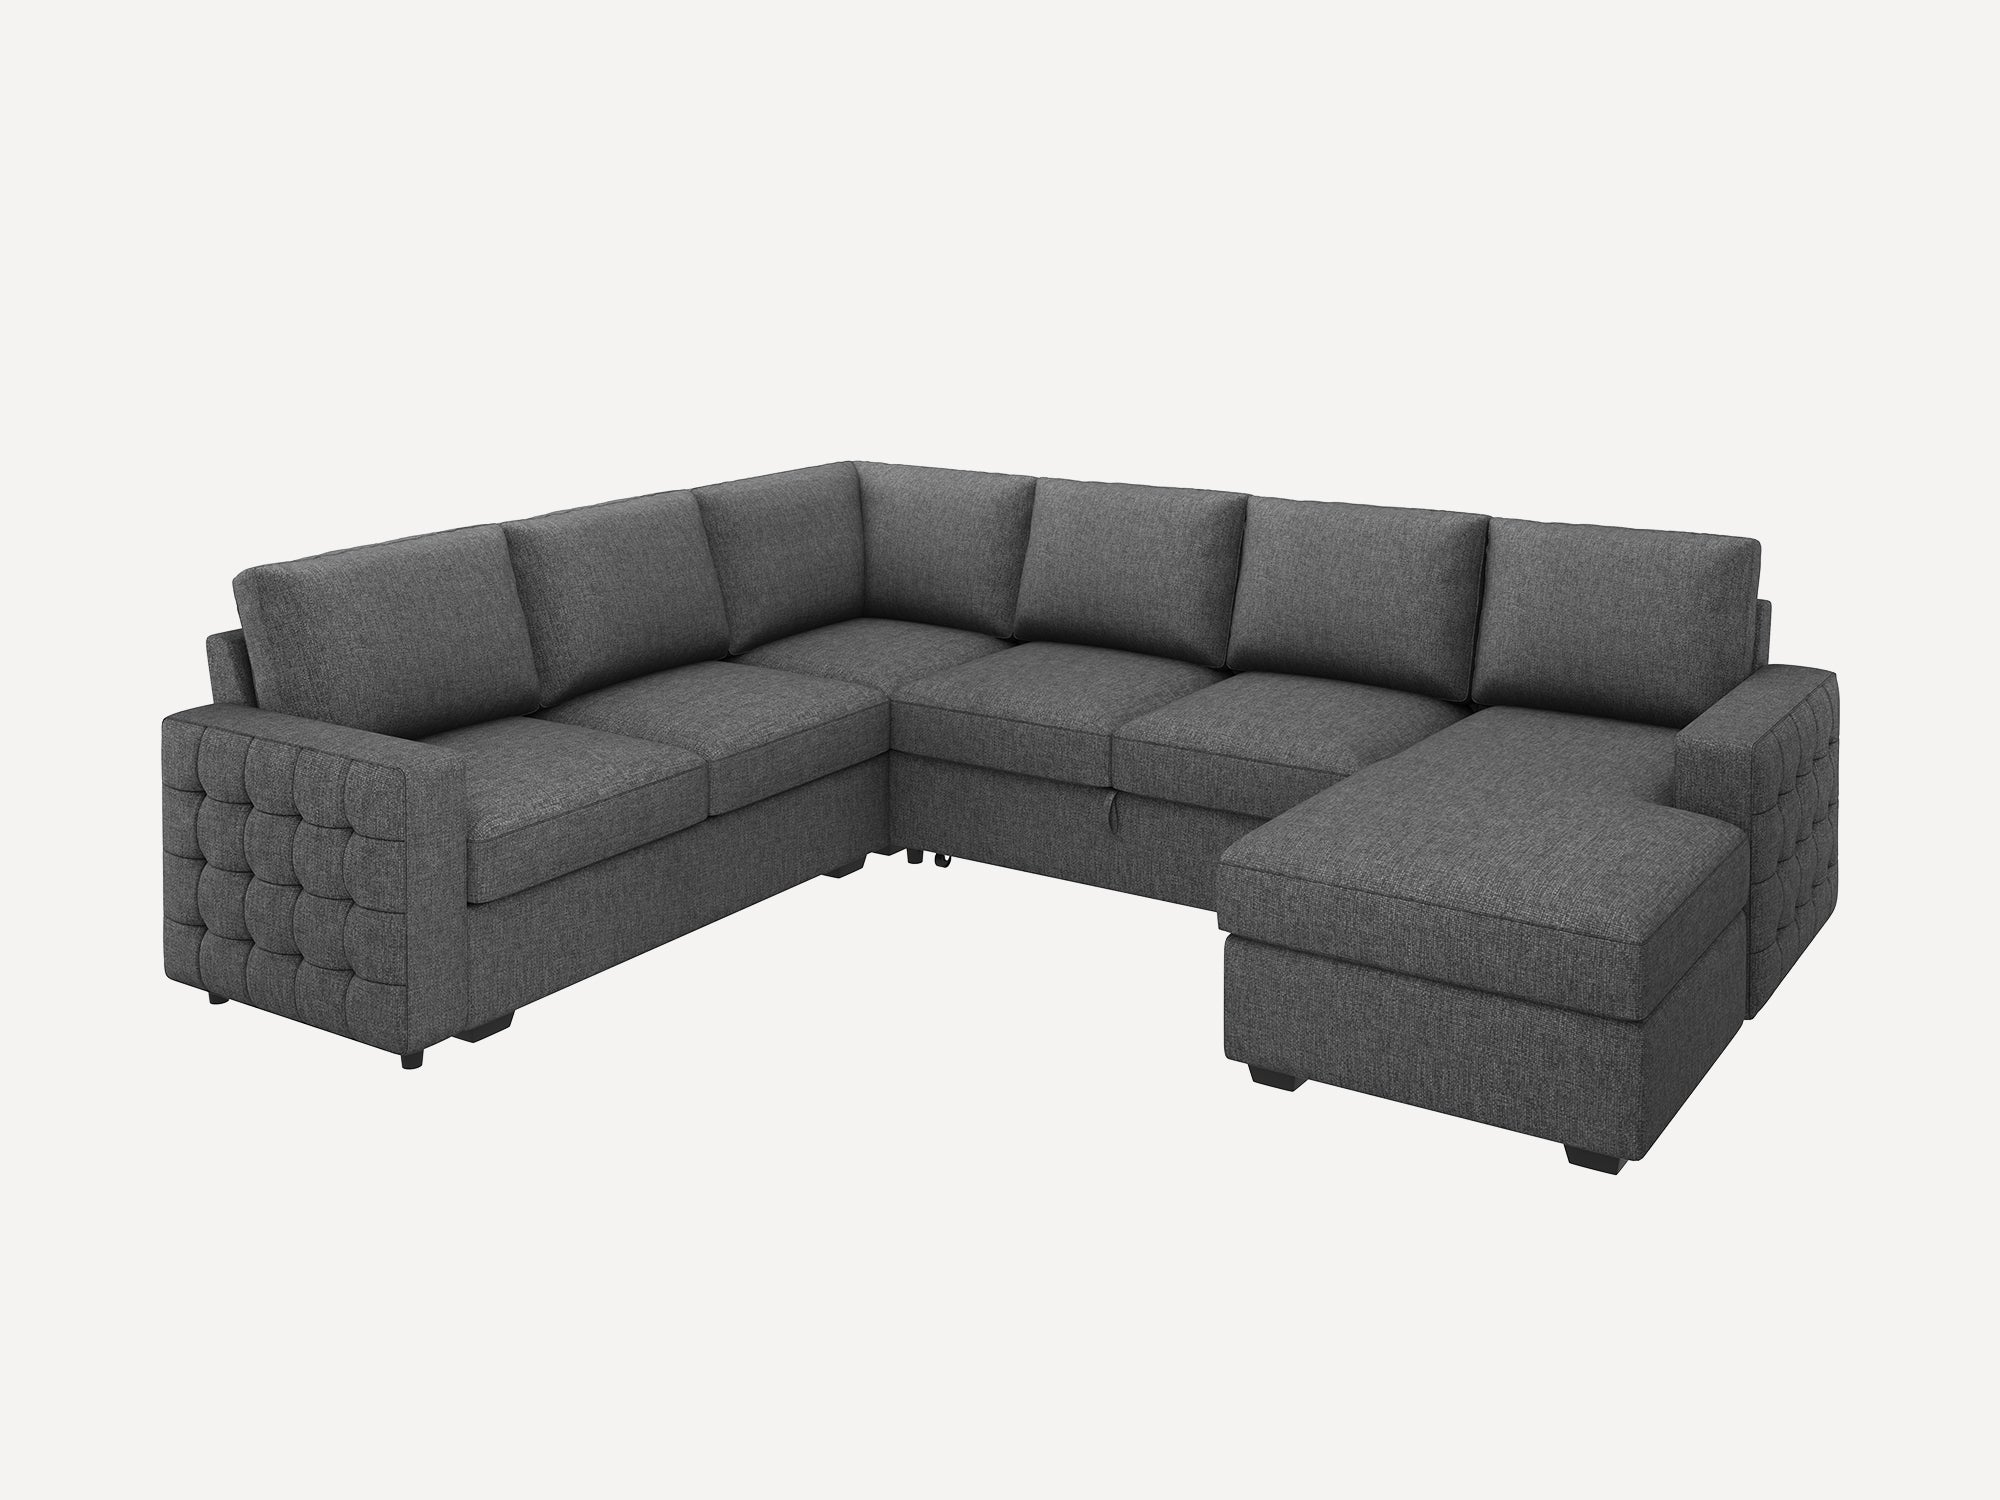 Bed Sleeper Couch U Shaped